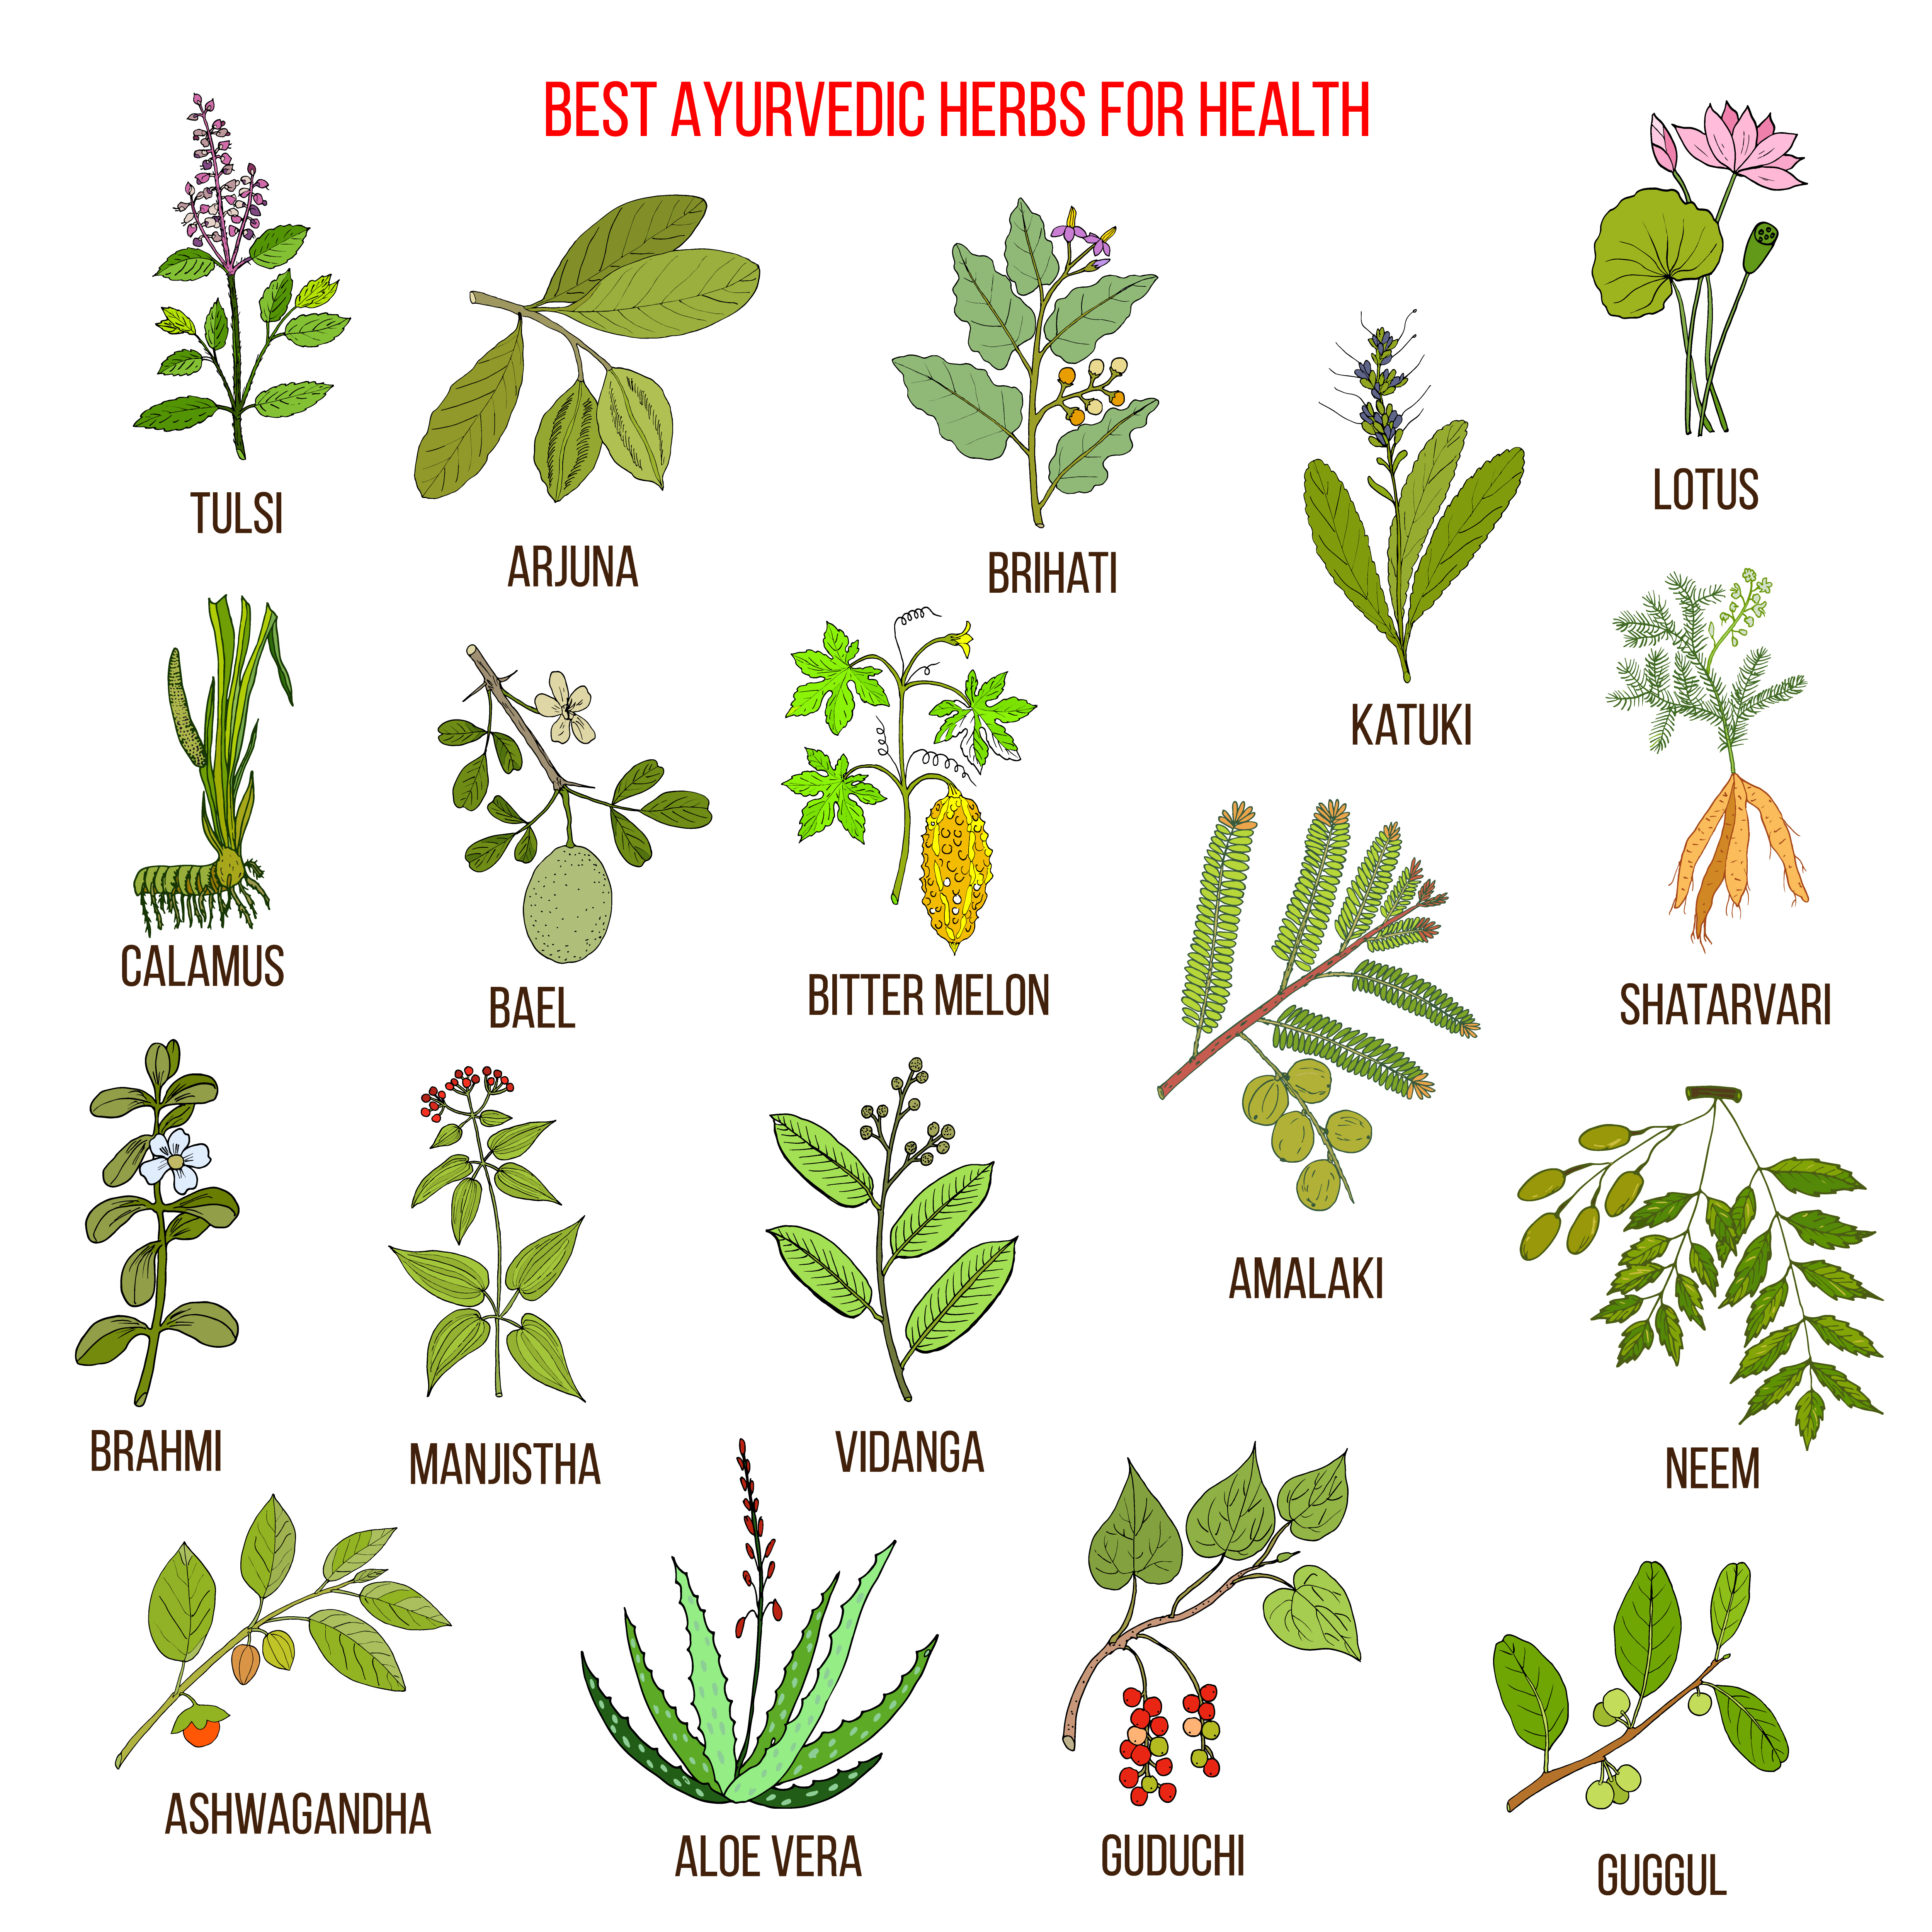 We have a plenty of herbs to boost our metabolism. And it is always suggested to stick to natural solutions!